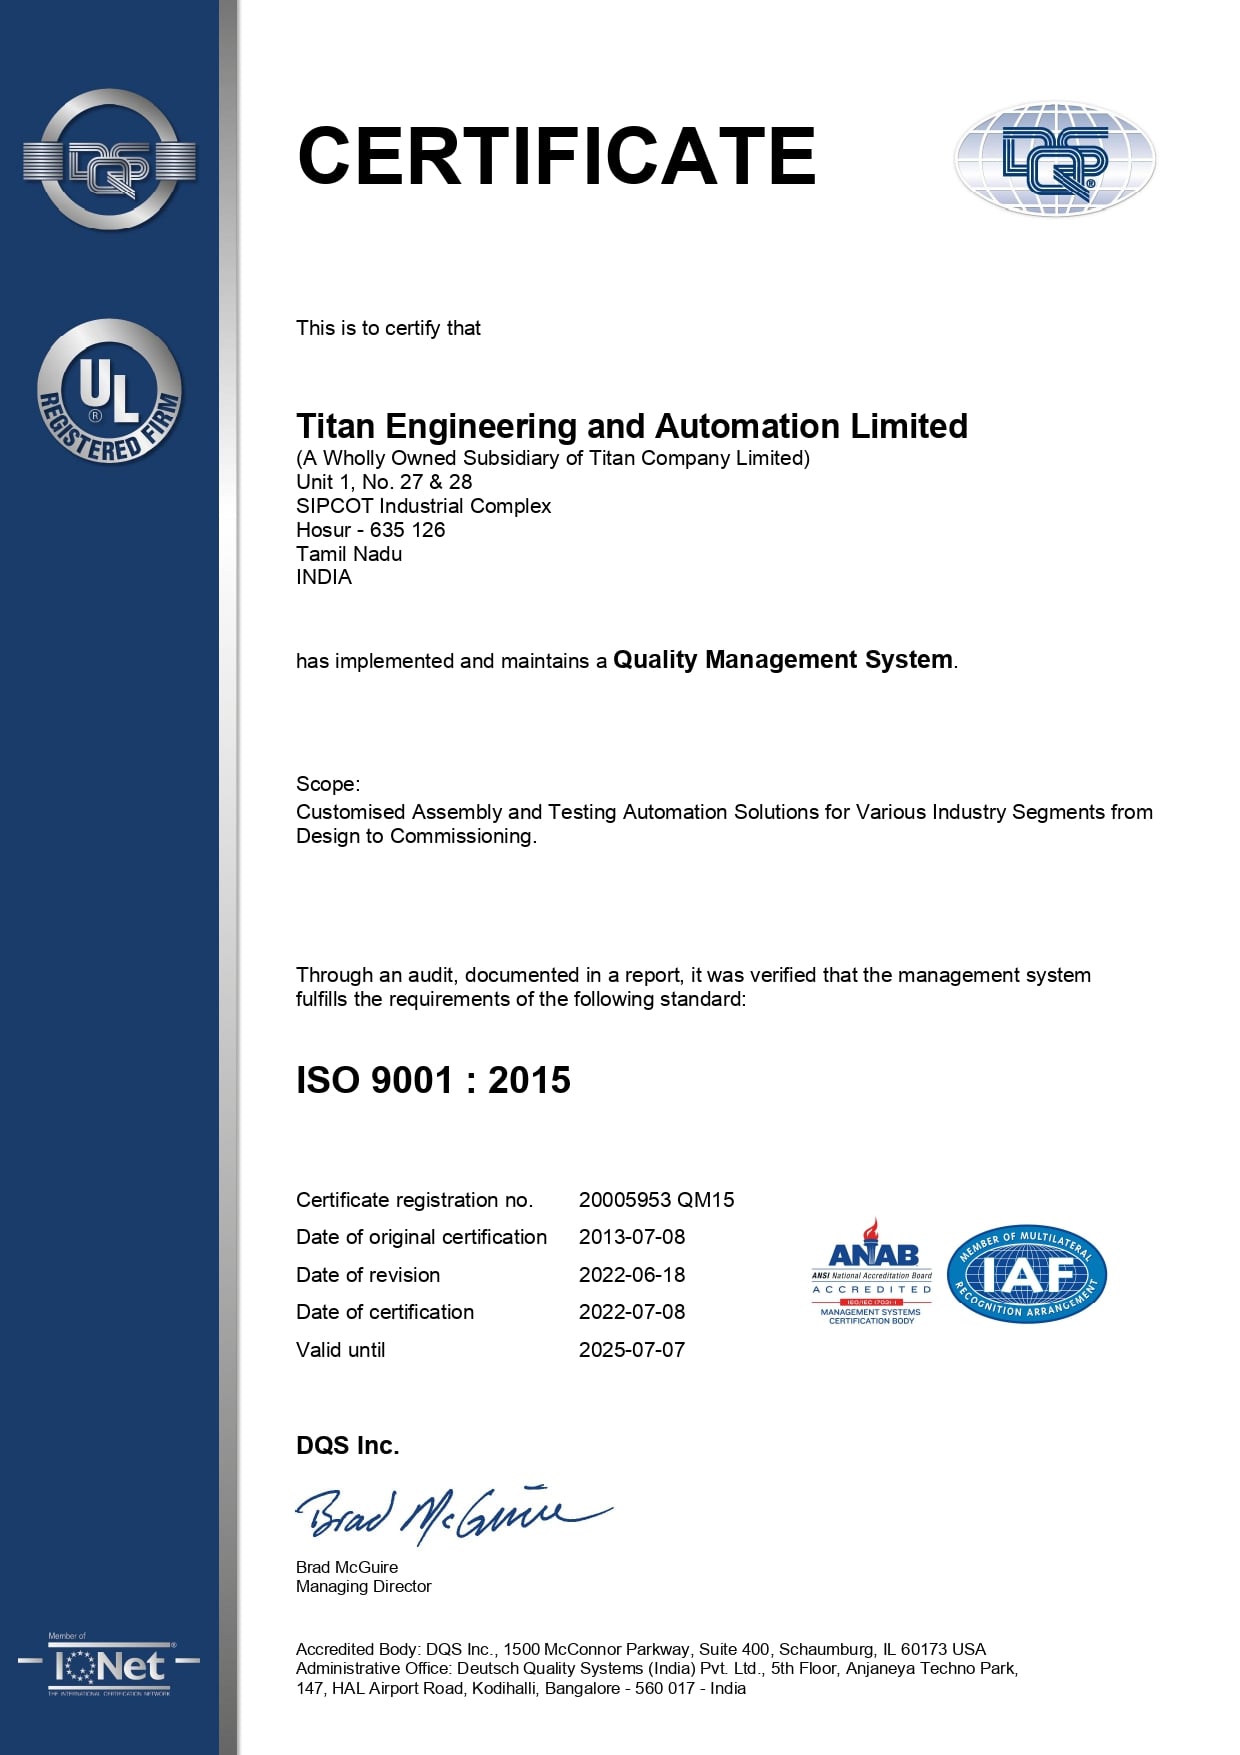 Titan engineering and automation Limited (TEAL) Quality Managment System Certificate